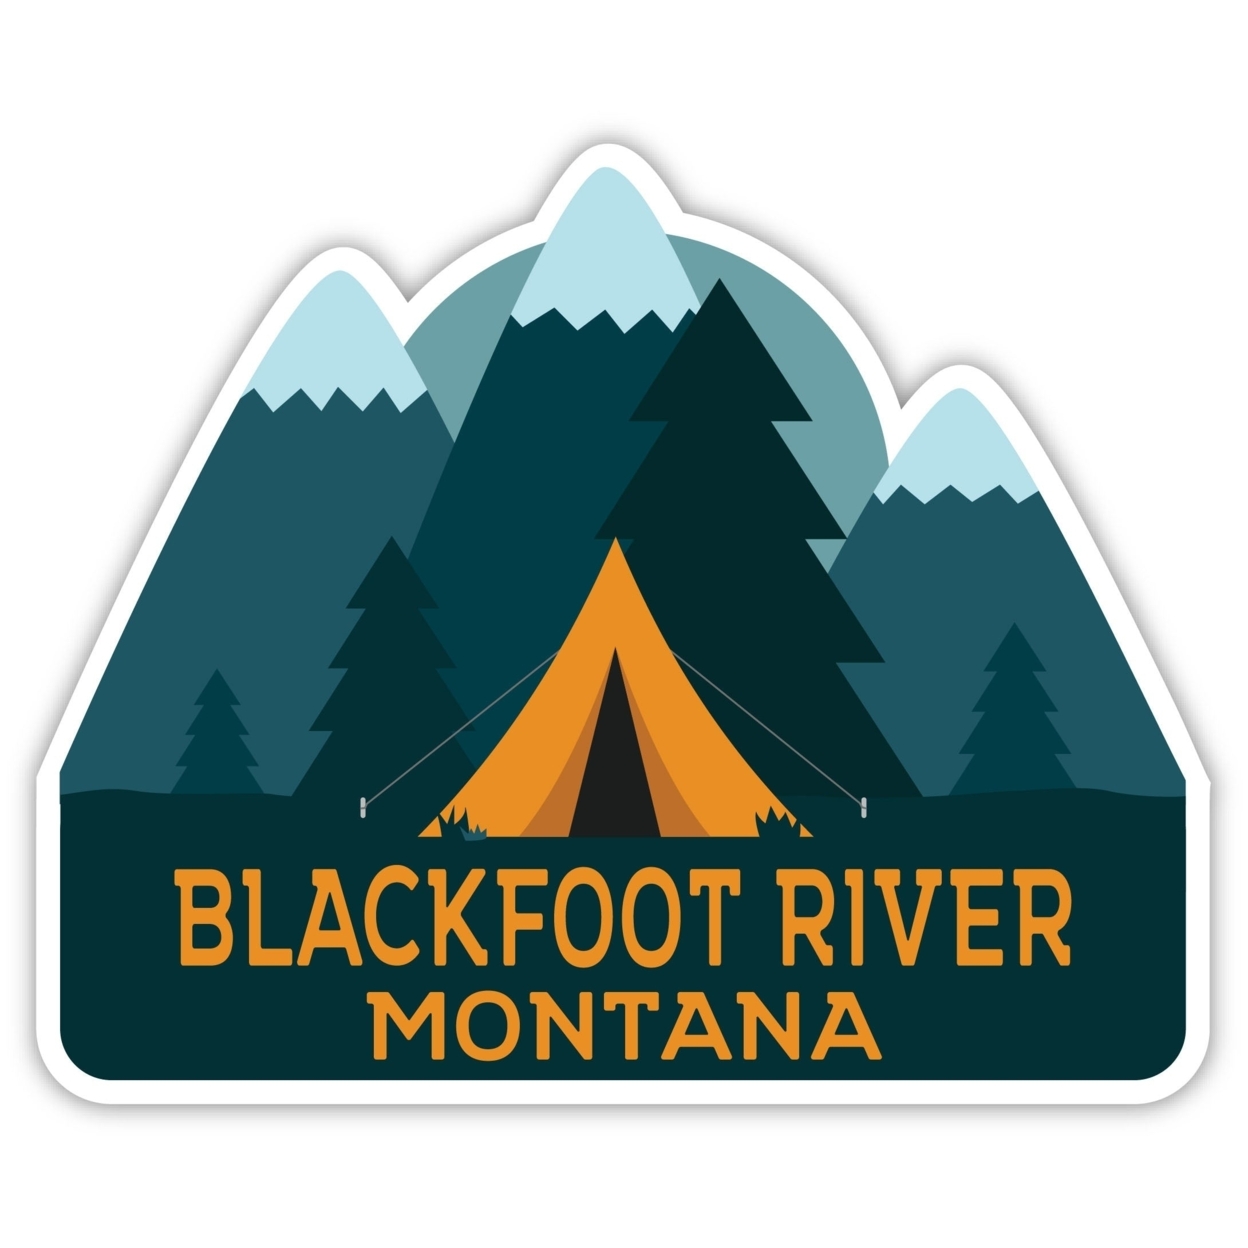 Blackfoot River Montana Souvenir Decorative Stickers (Choose Theme And Size) - 4-Pack, 12-Inch, Tent